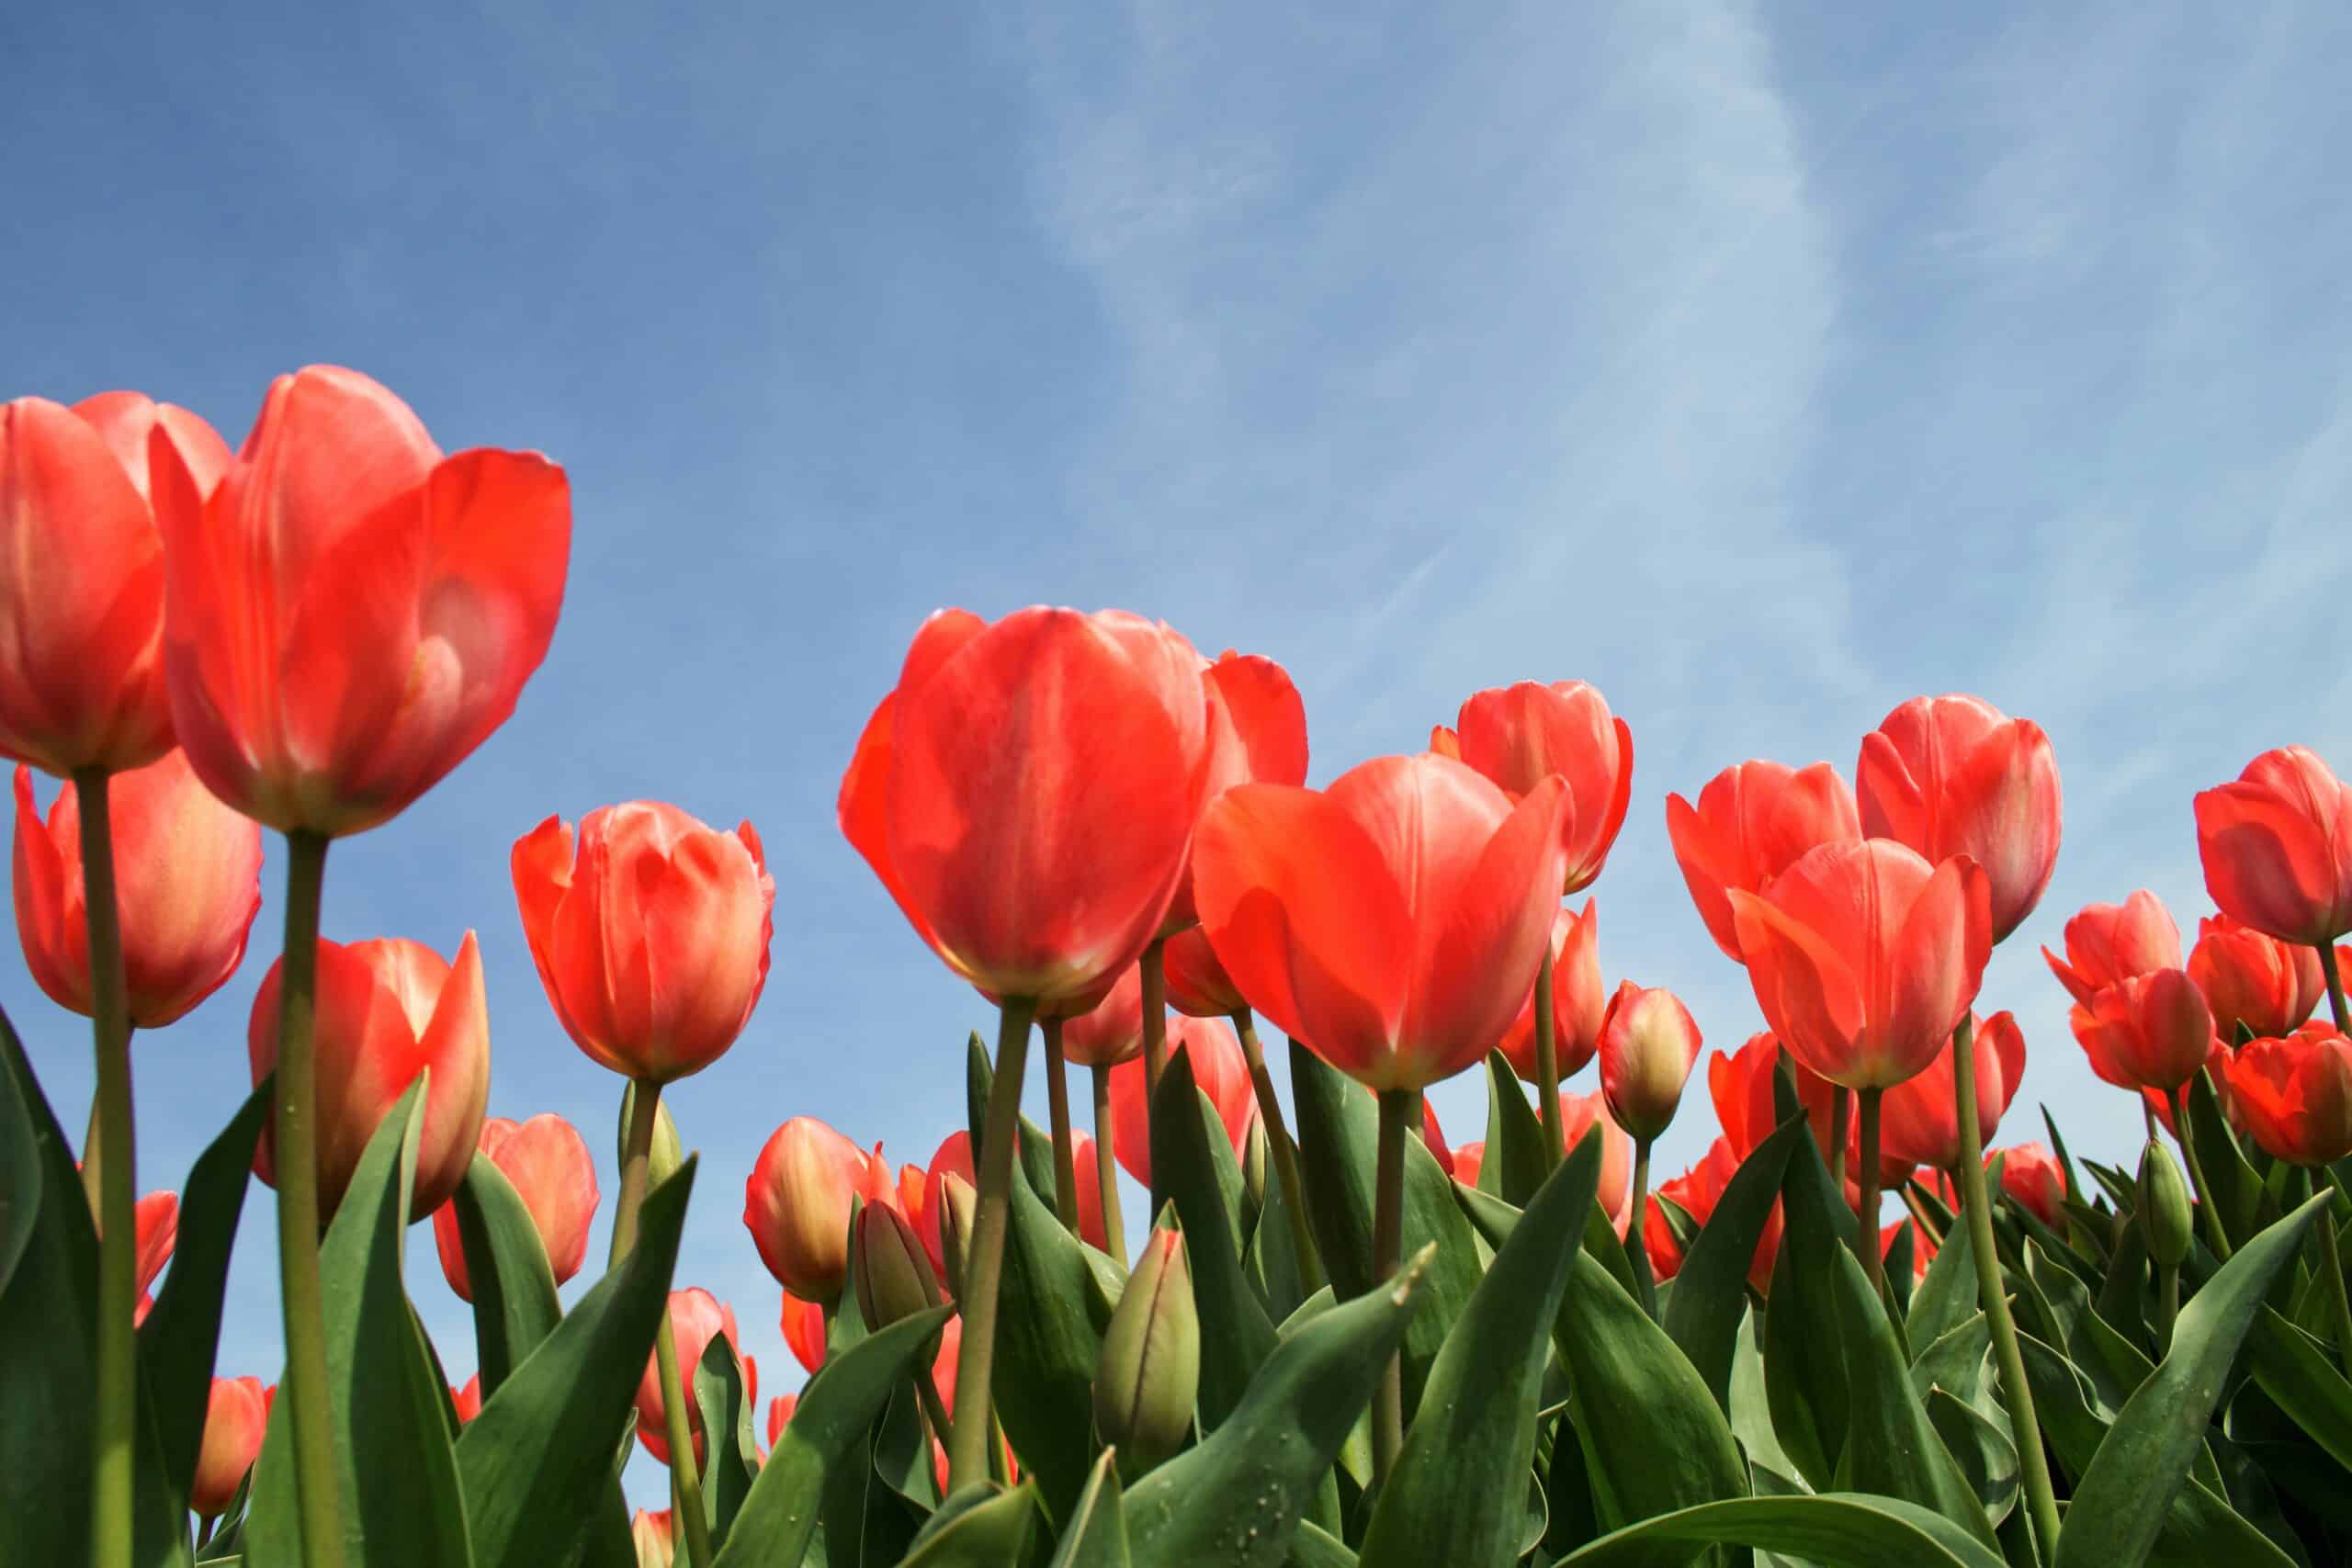 A field of Red Tulips with a bright blue sky in the background